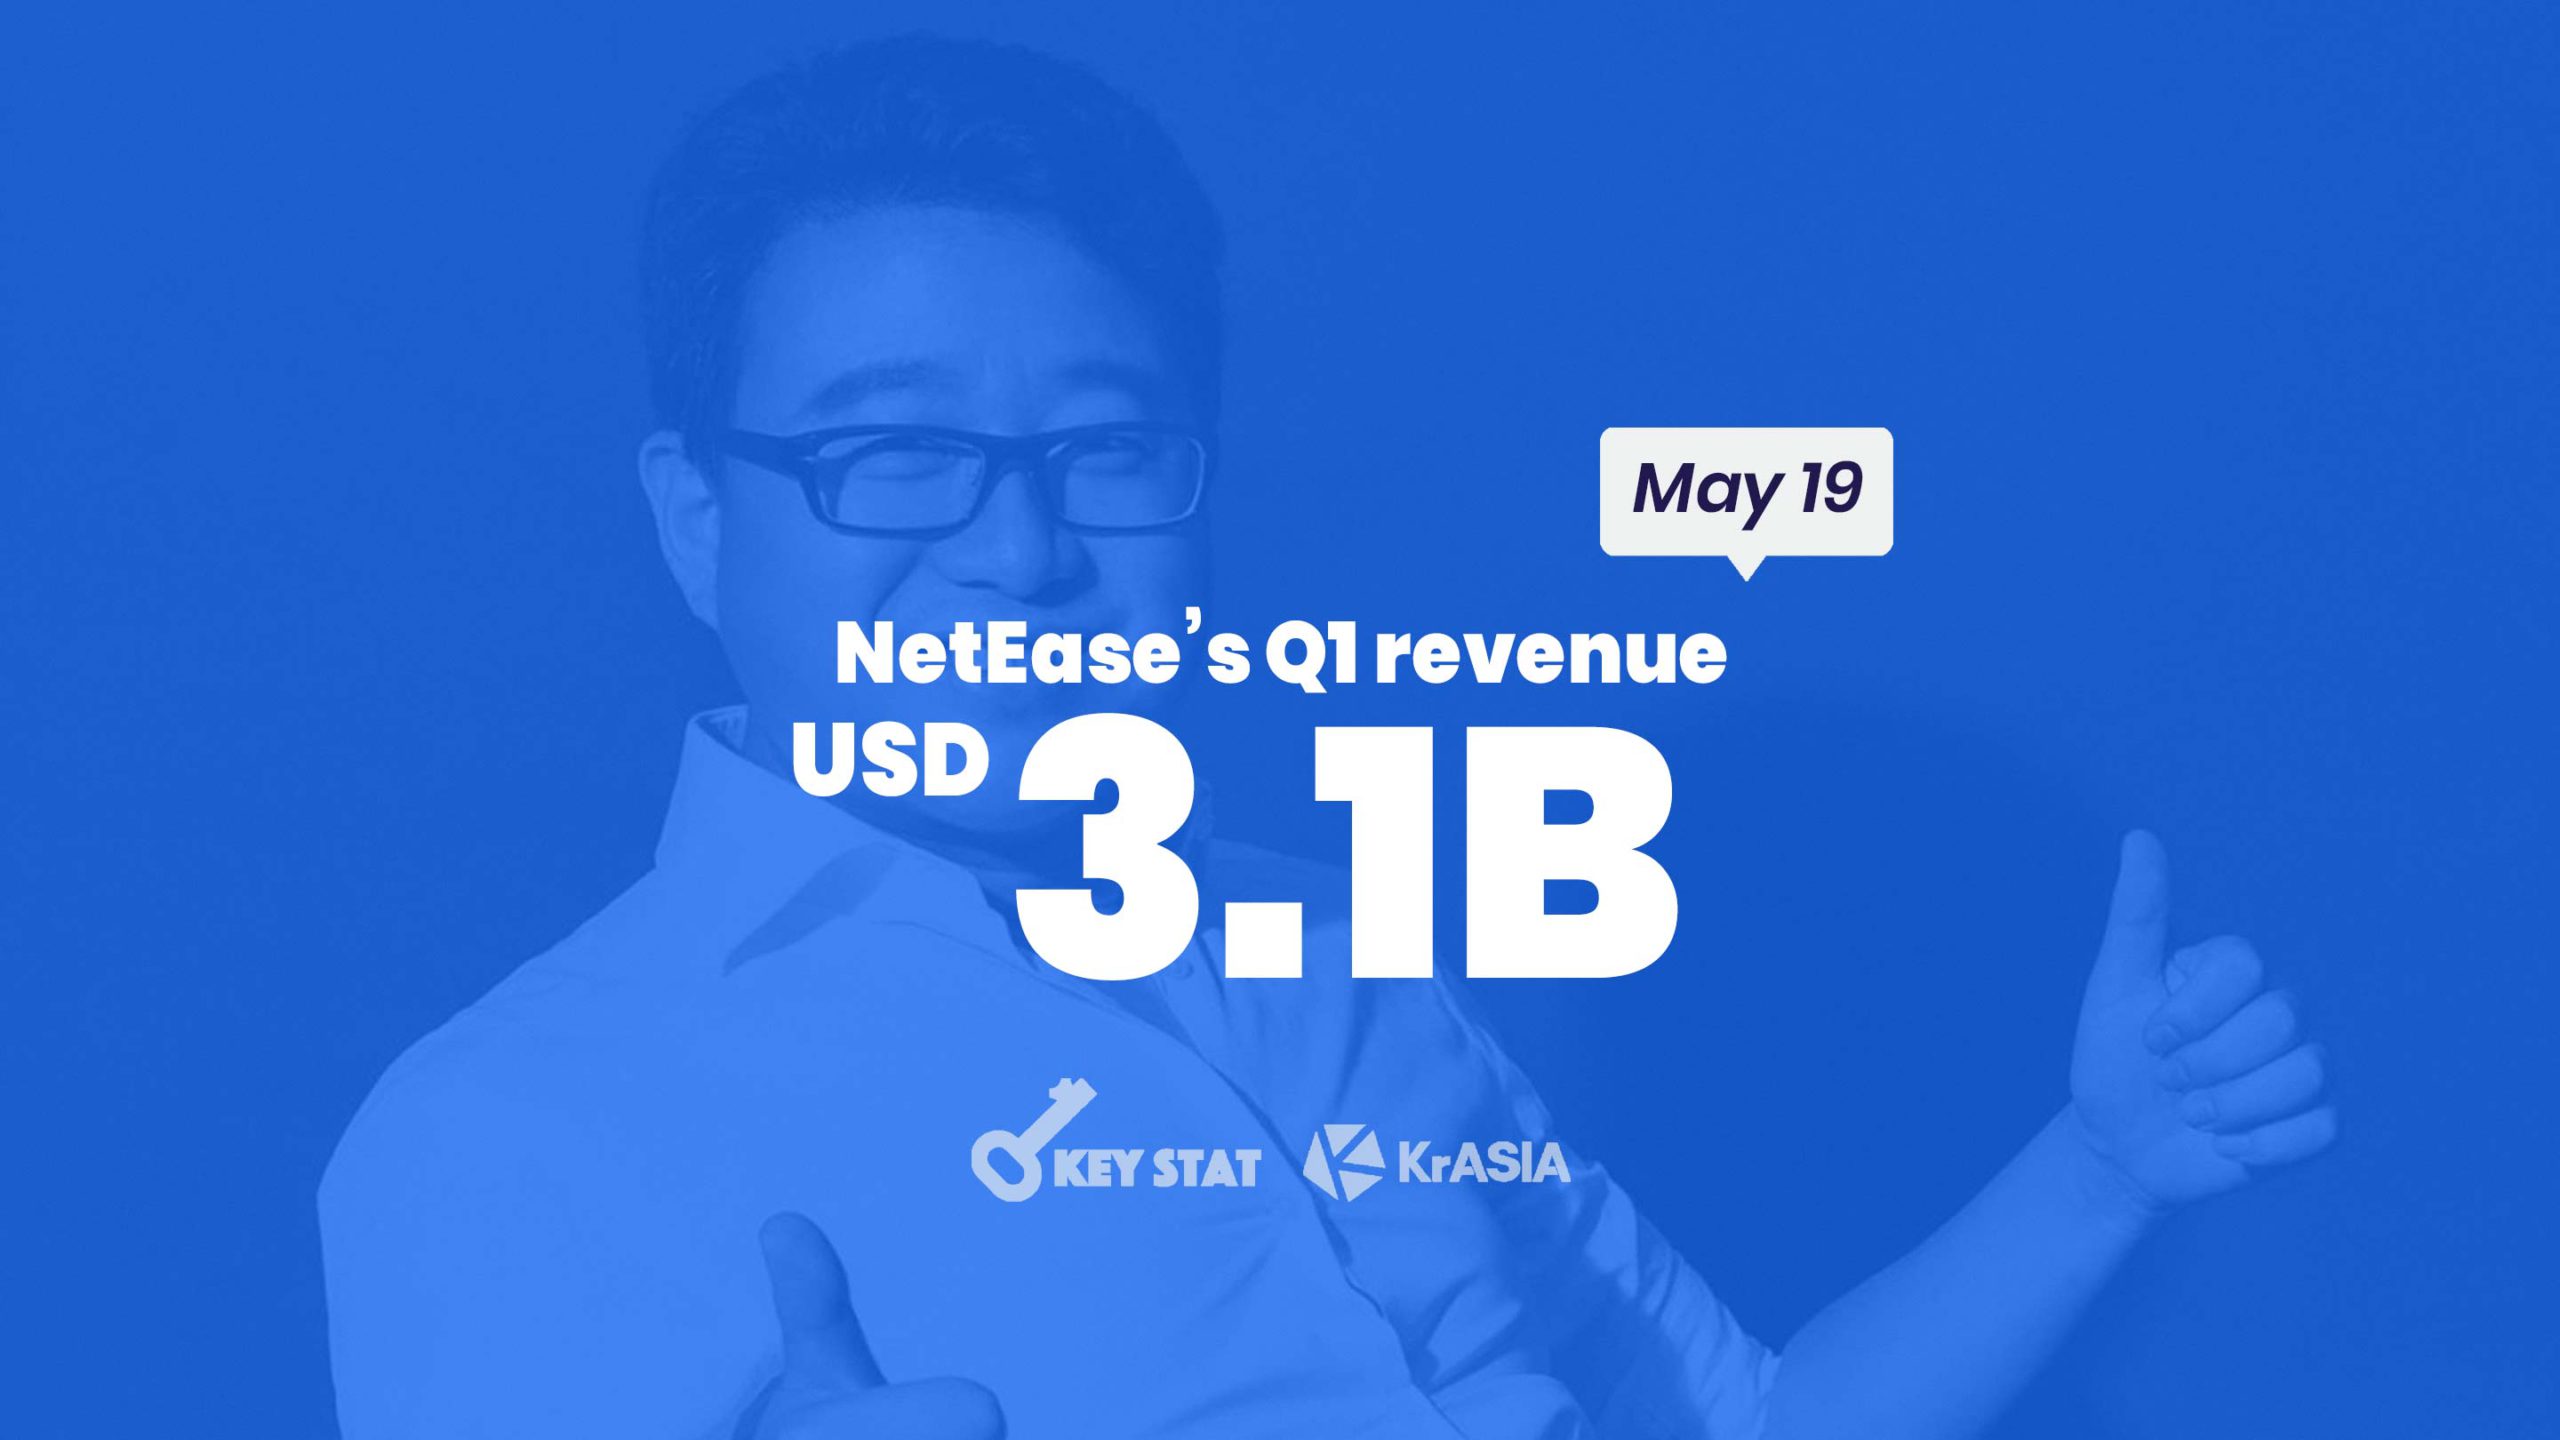 KEY STAT | NetEase reports increased revenue and profits as Youdao posts best profit margin ever